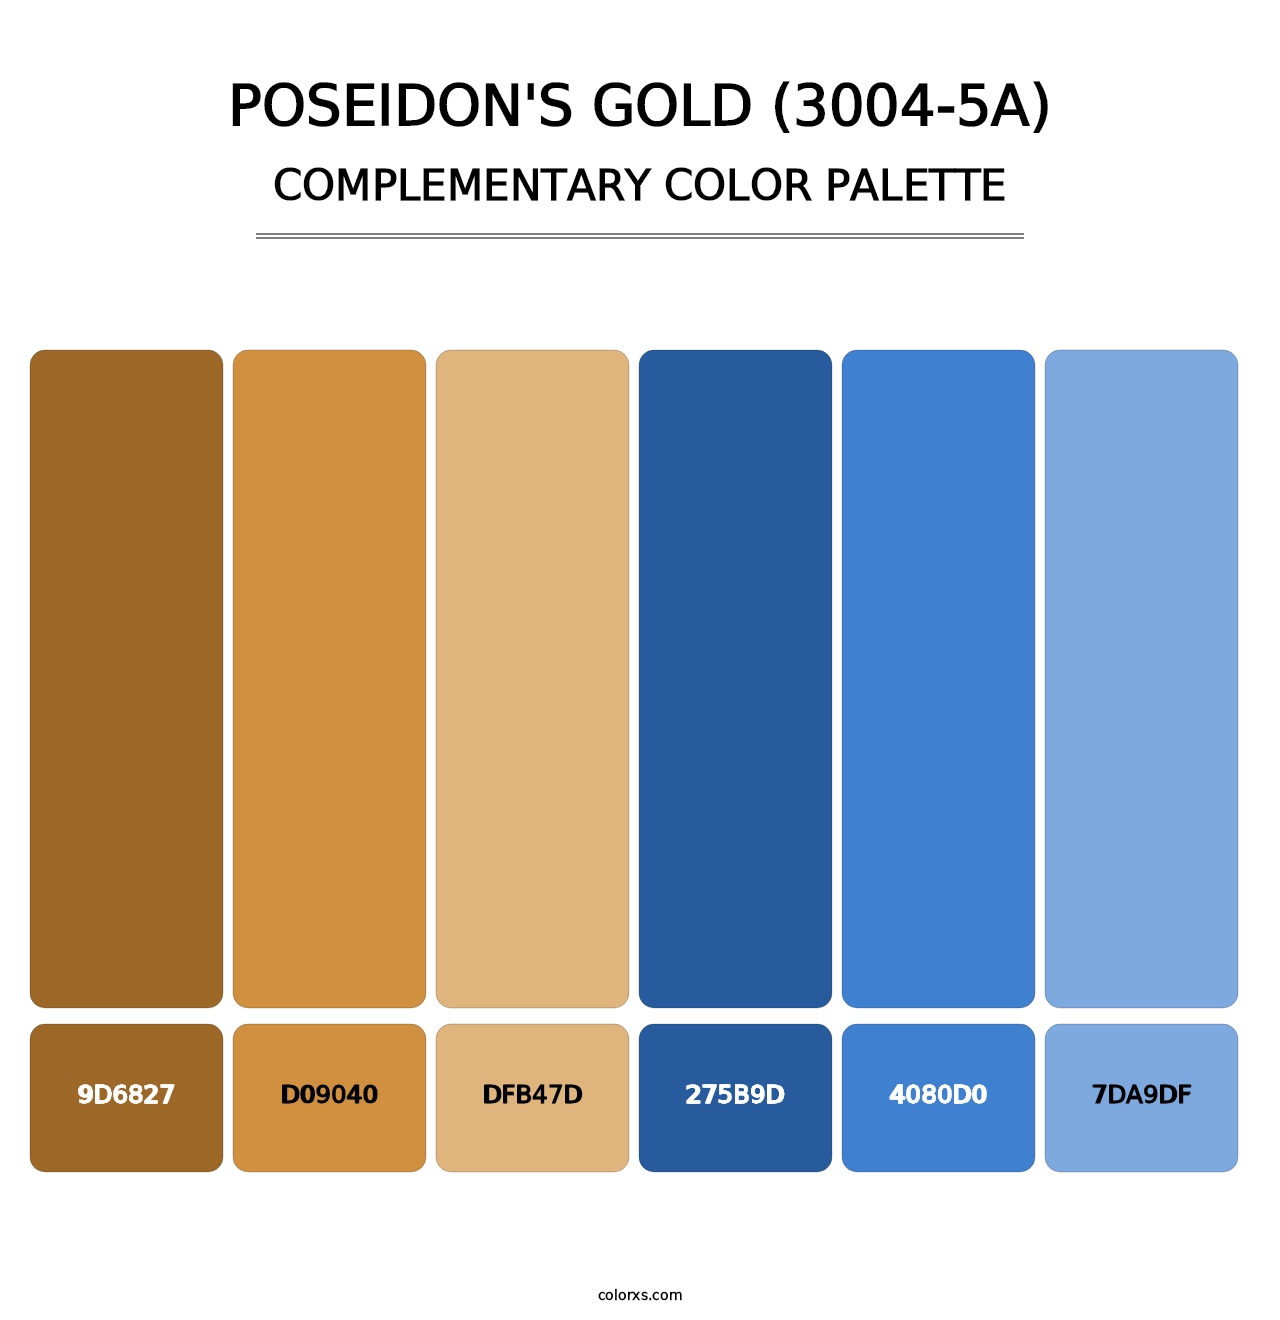 Poseidon's Gold (3004-5A) - Complementary Color Palette